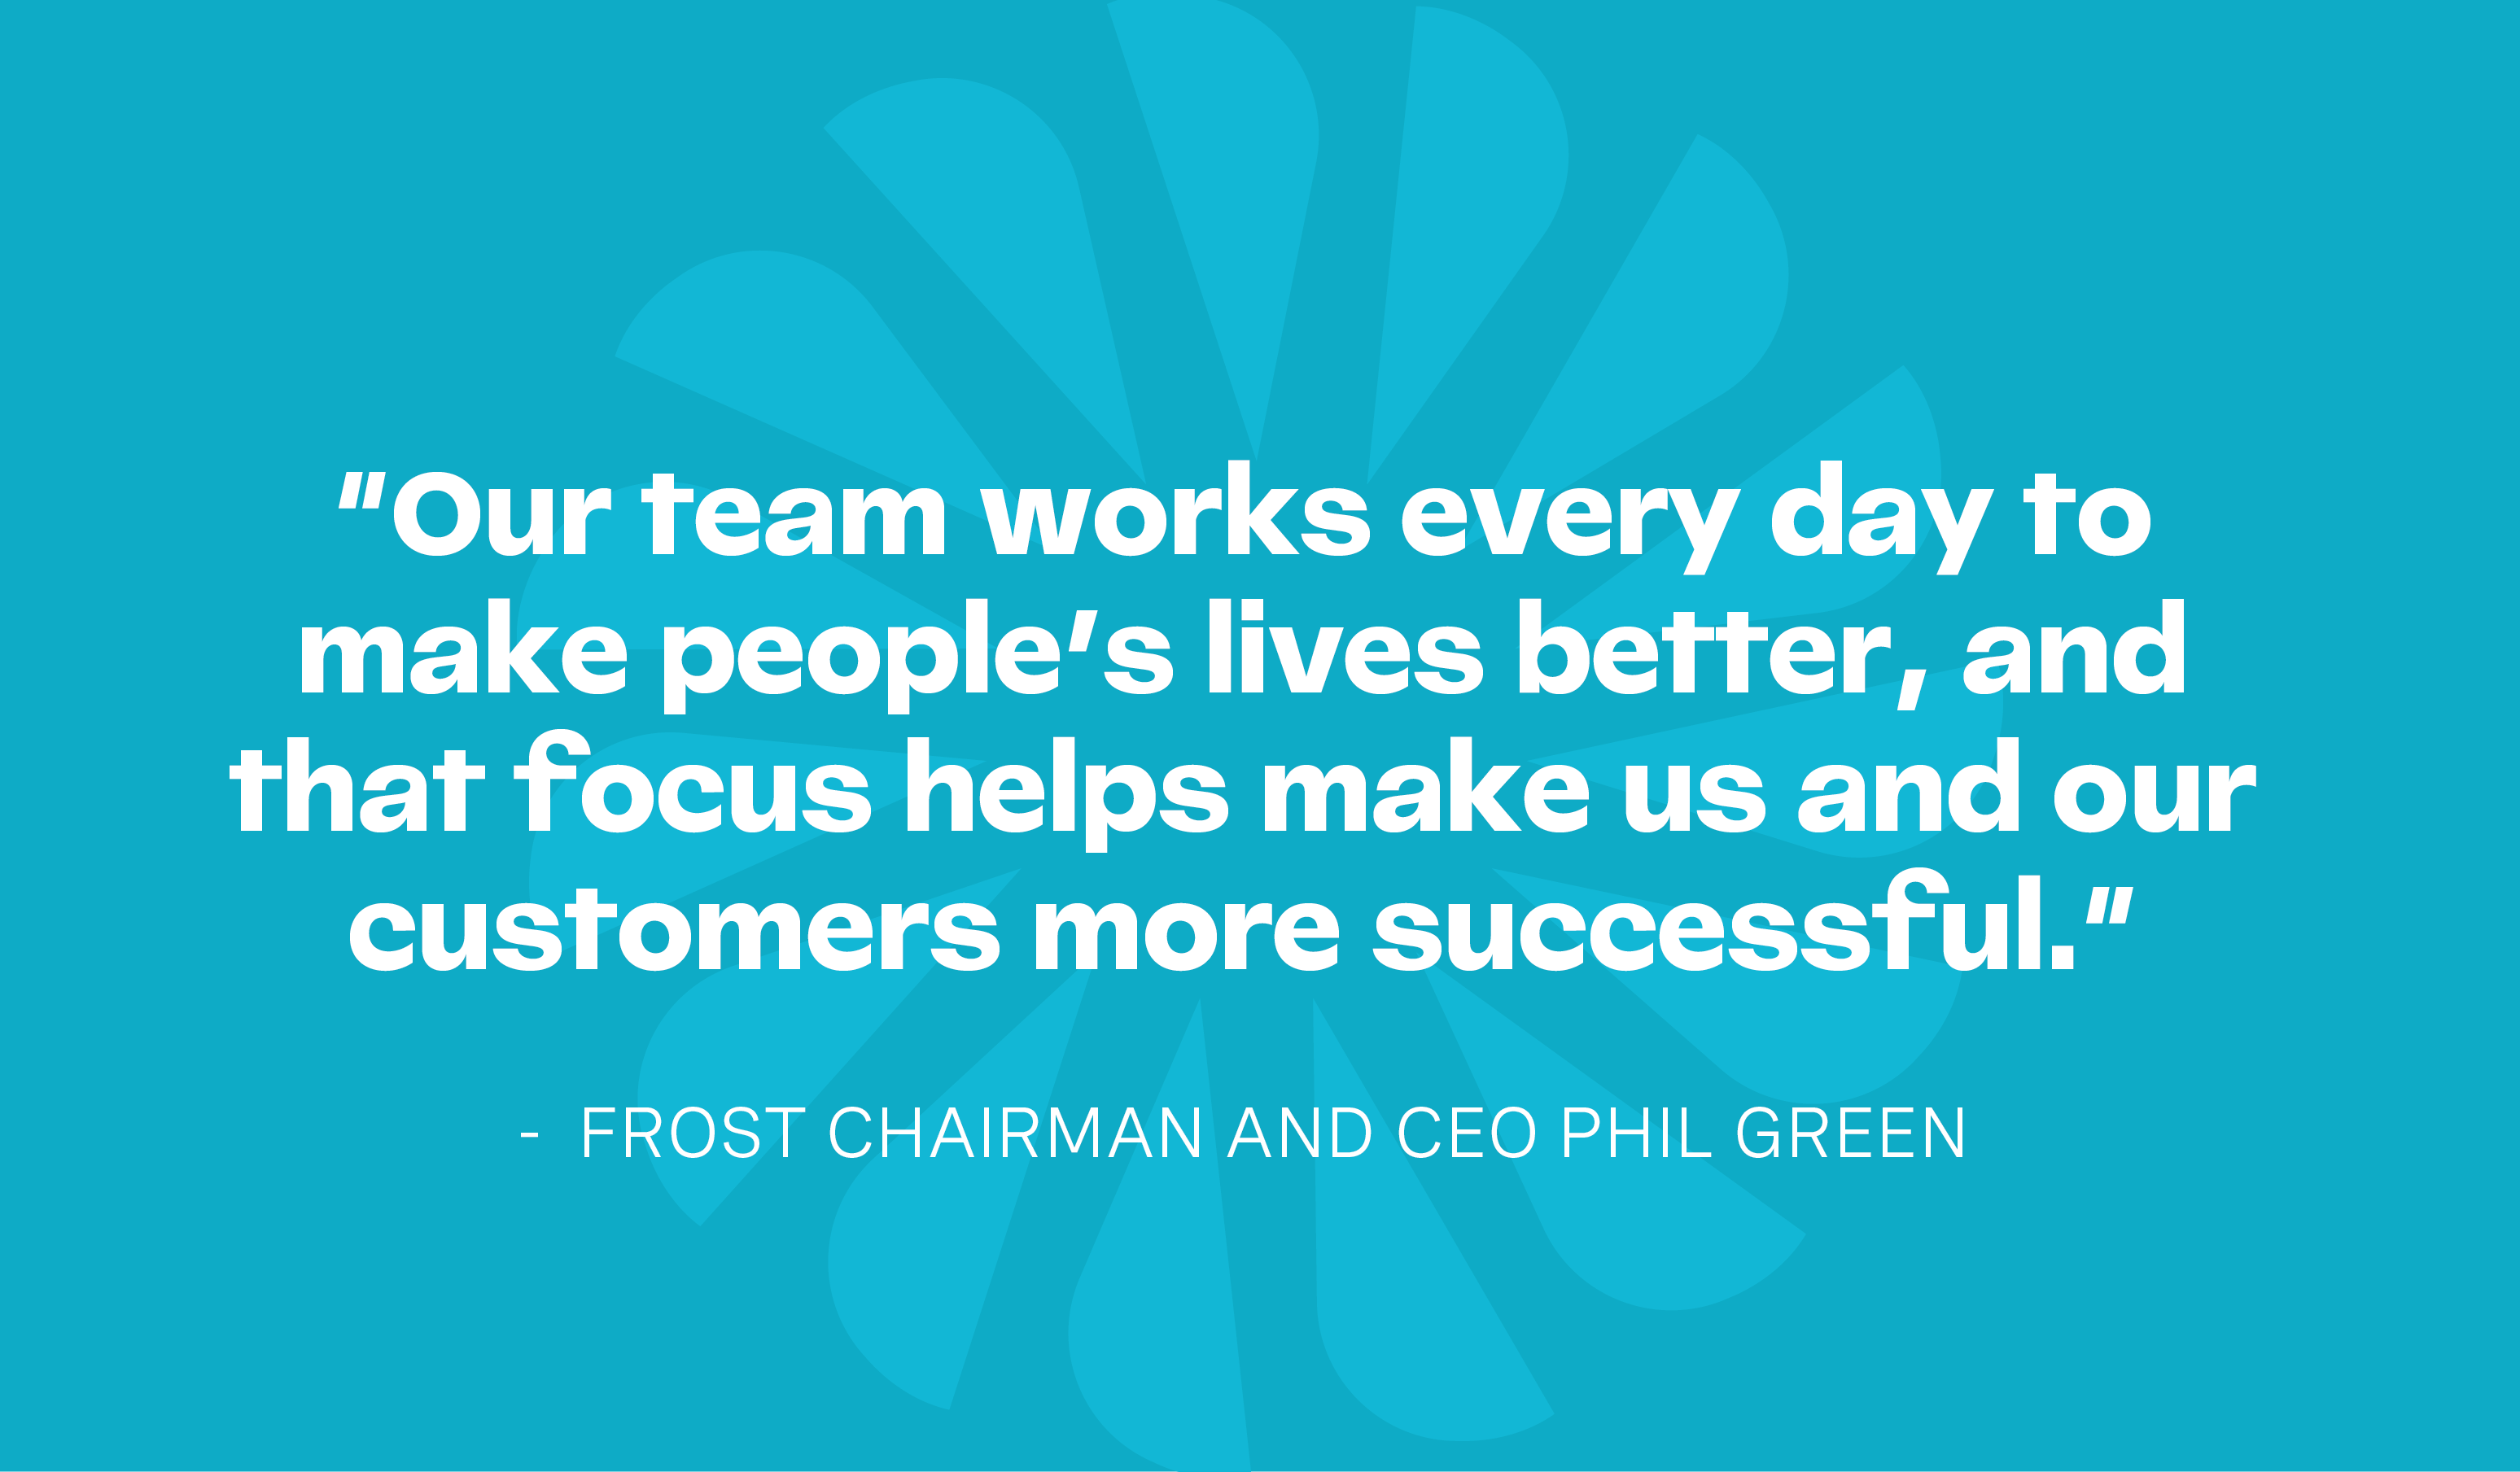 Frost Chairman and CEO Phil Green says, 'Our team works every day to make people's lives better, and that focus helps make us and our customers more successful'.